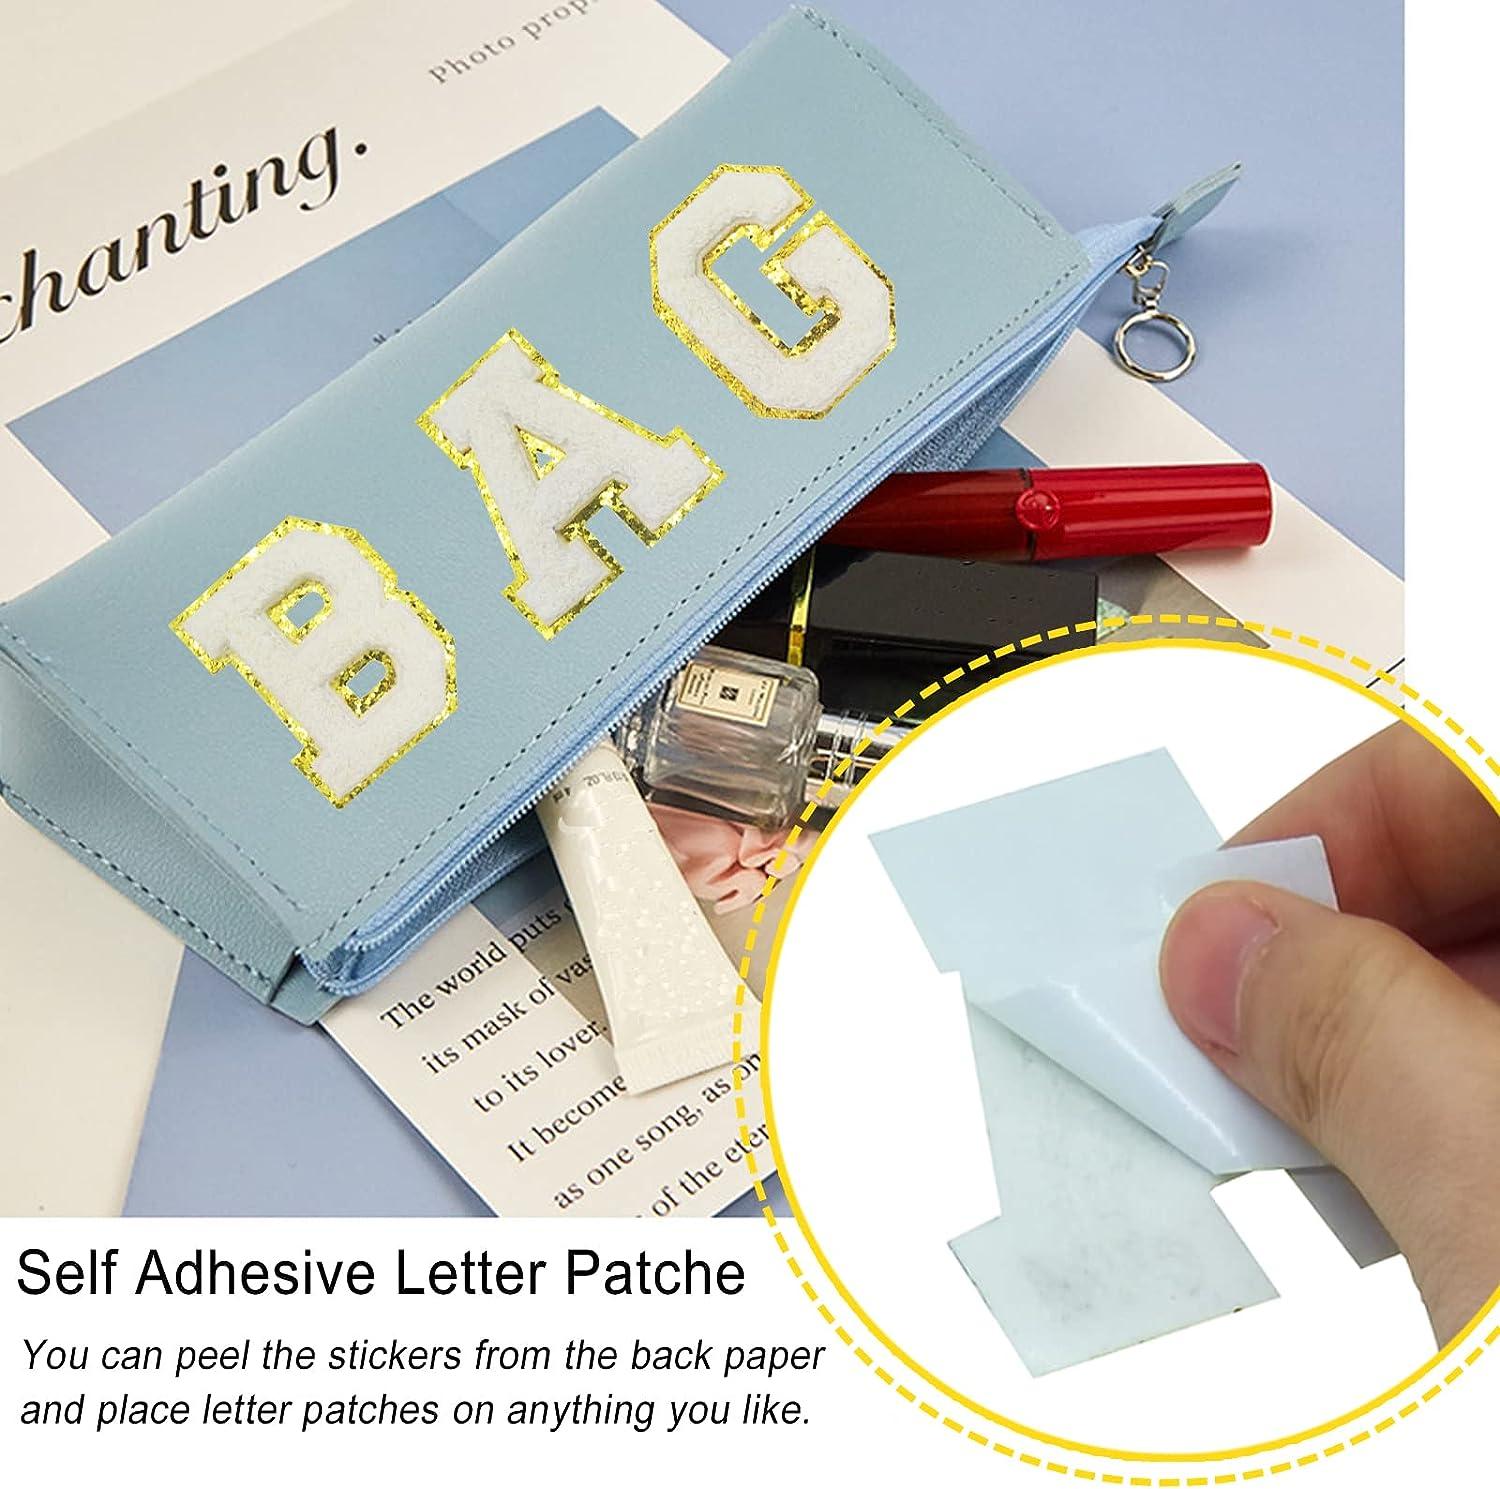  2 PCS Self Adhesive Letter Patches For DIY Supplies